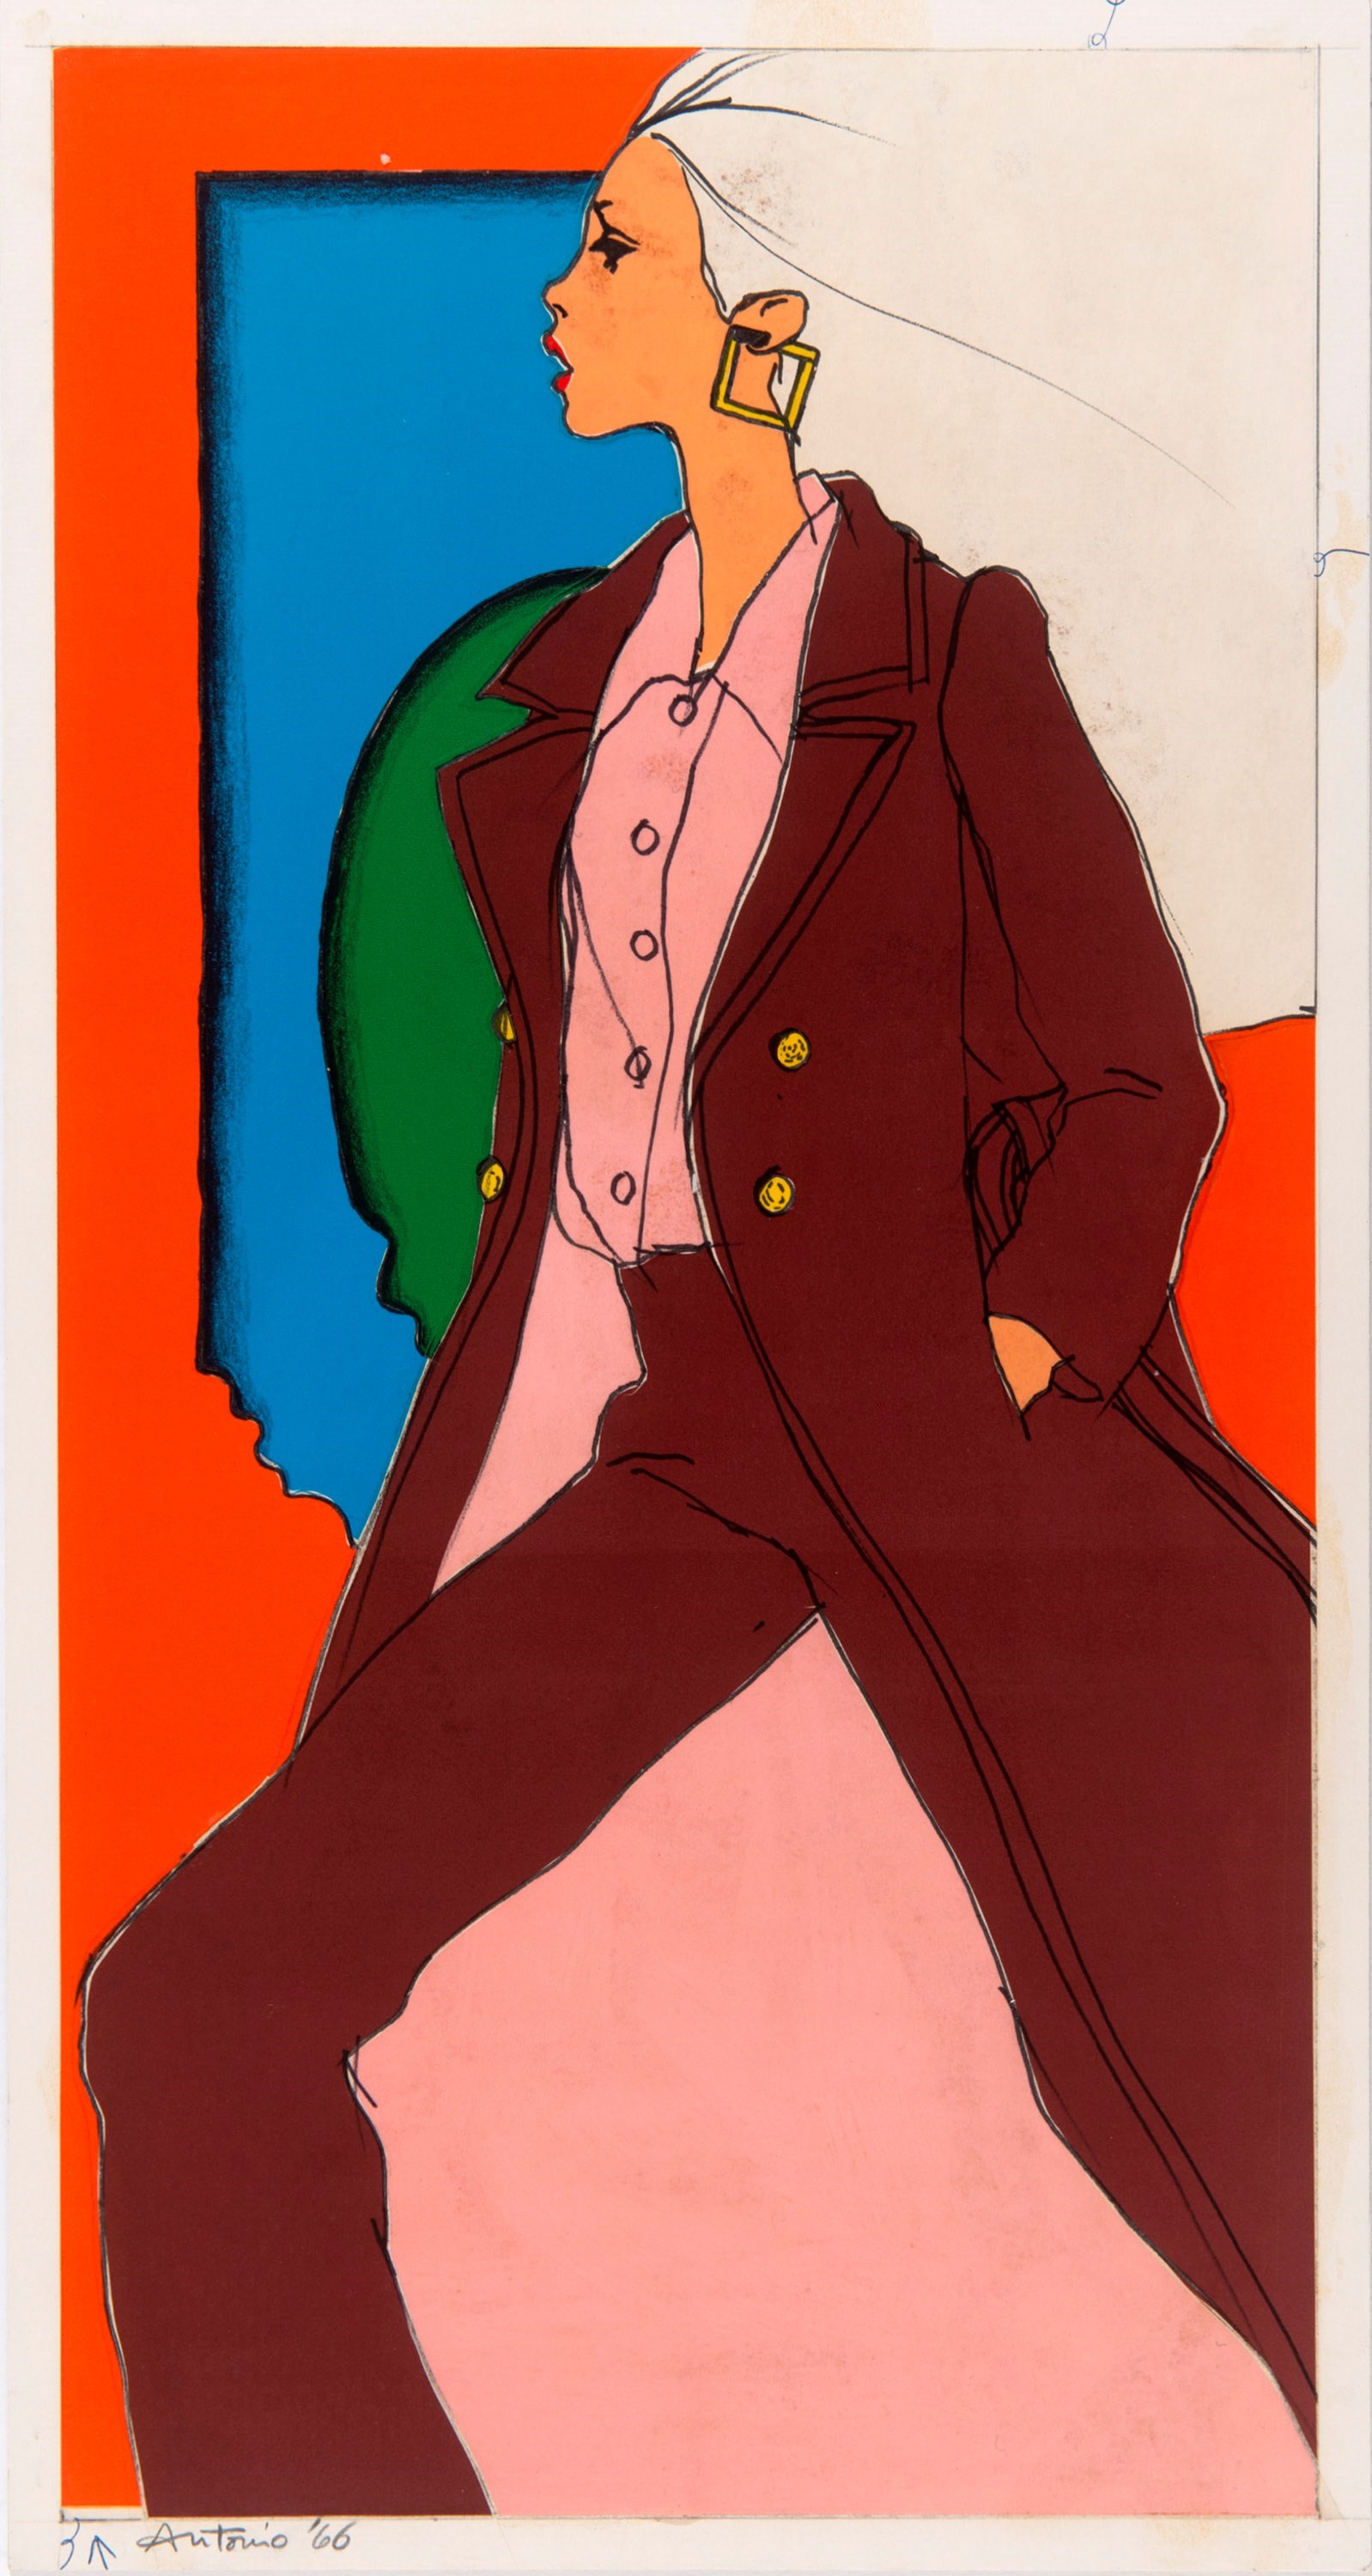 Antonio Lopez is the fashion illustrator at the heart of 1970s